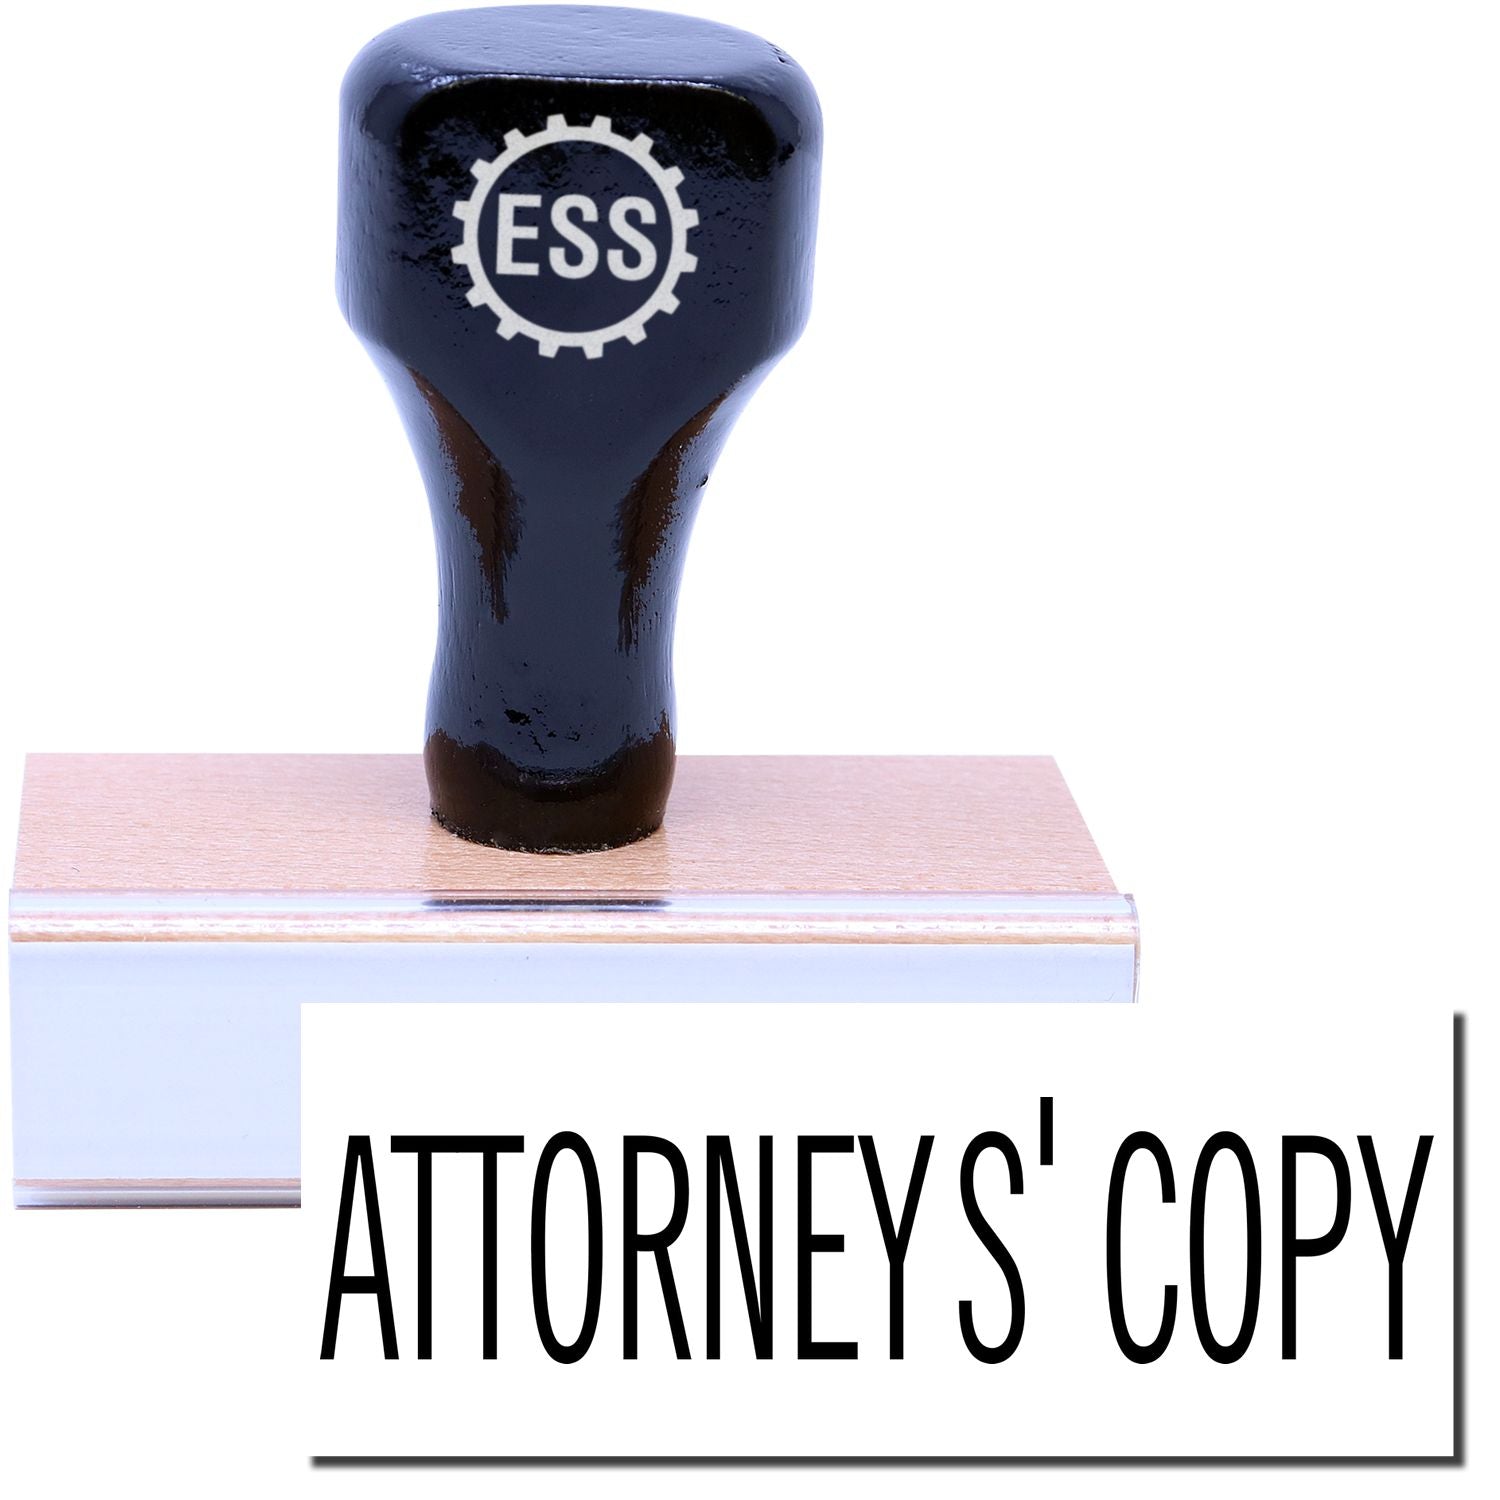 A stock office rubber stamp with a stamped image showing how the text "ATTORNEYS' COPY" is displayed after stamping.